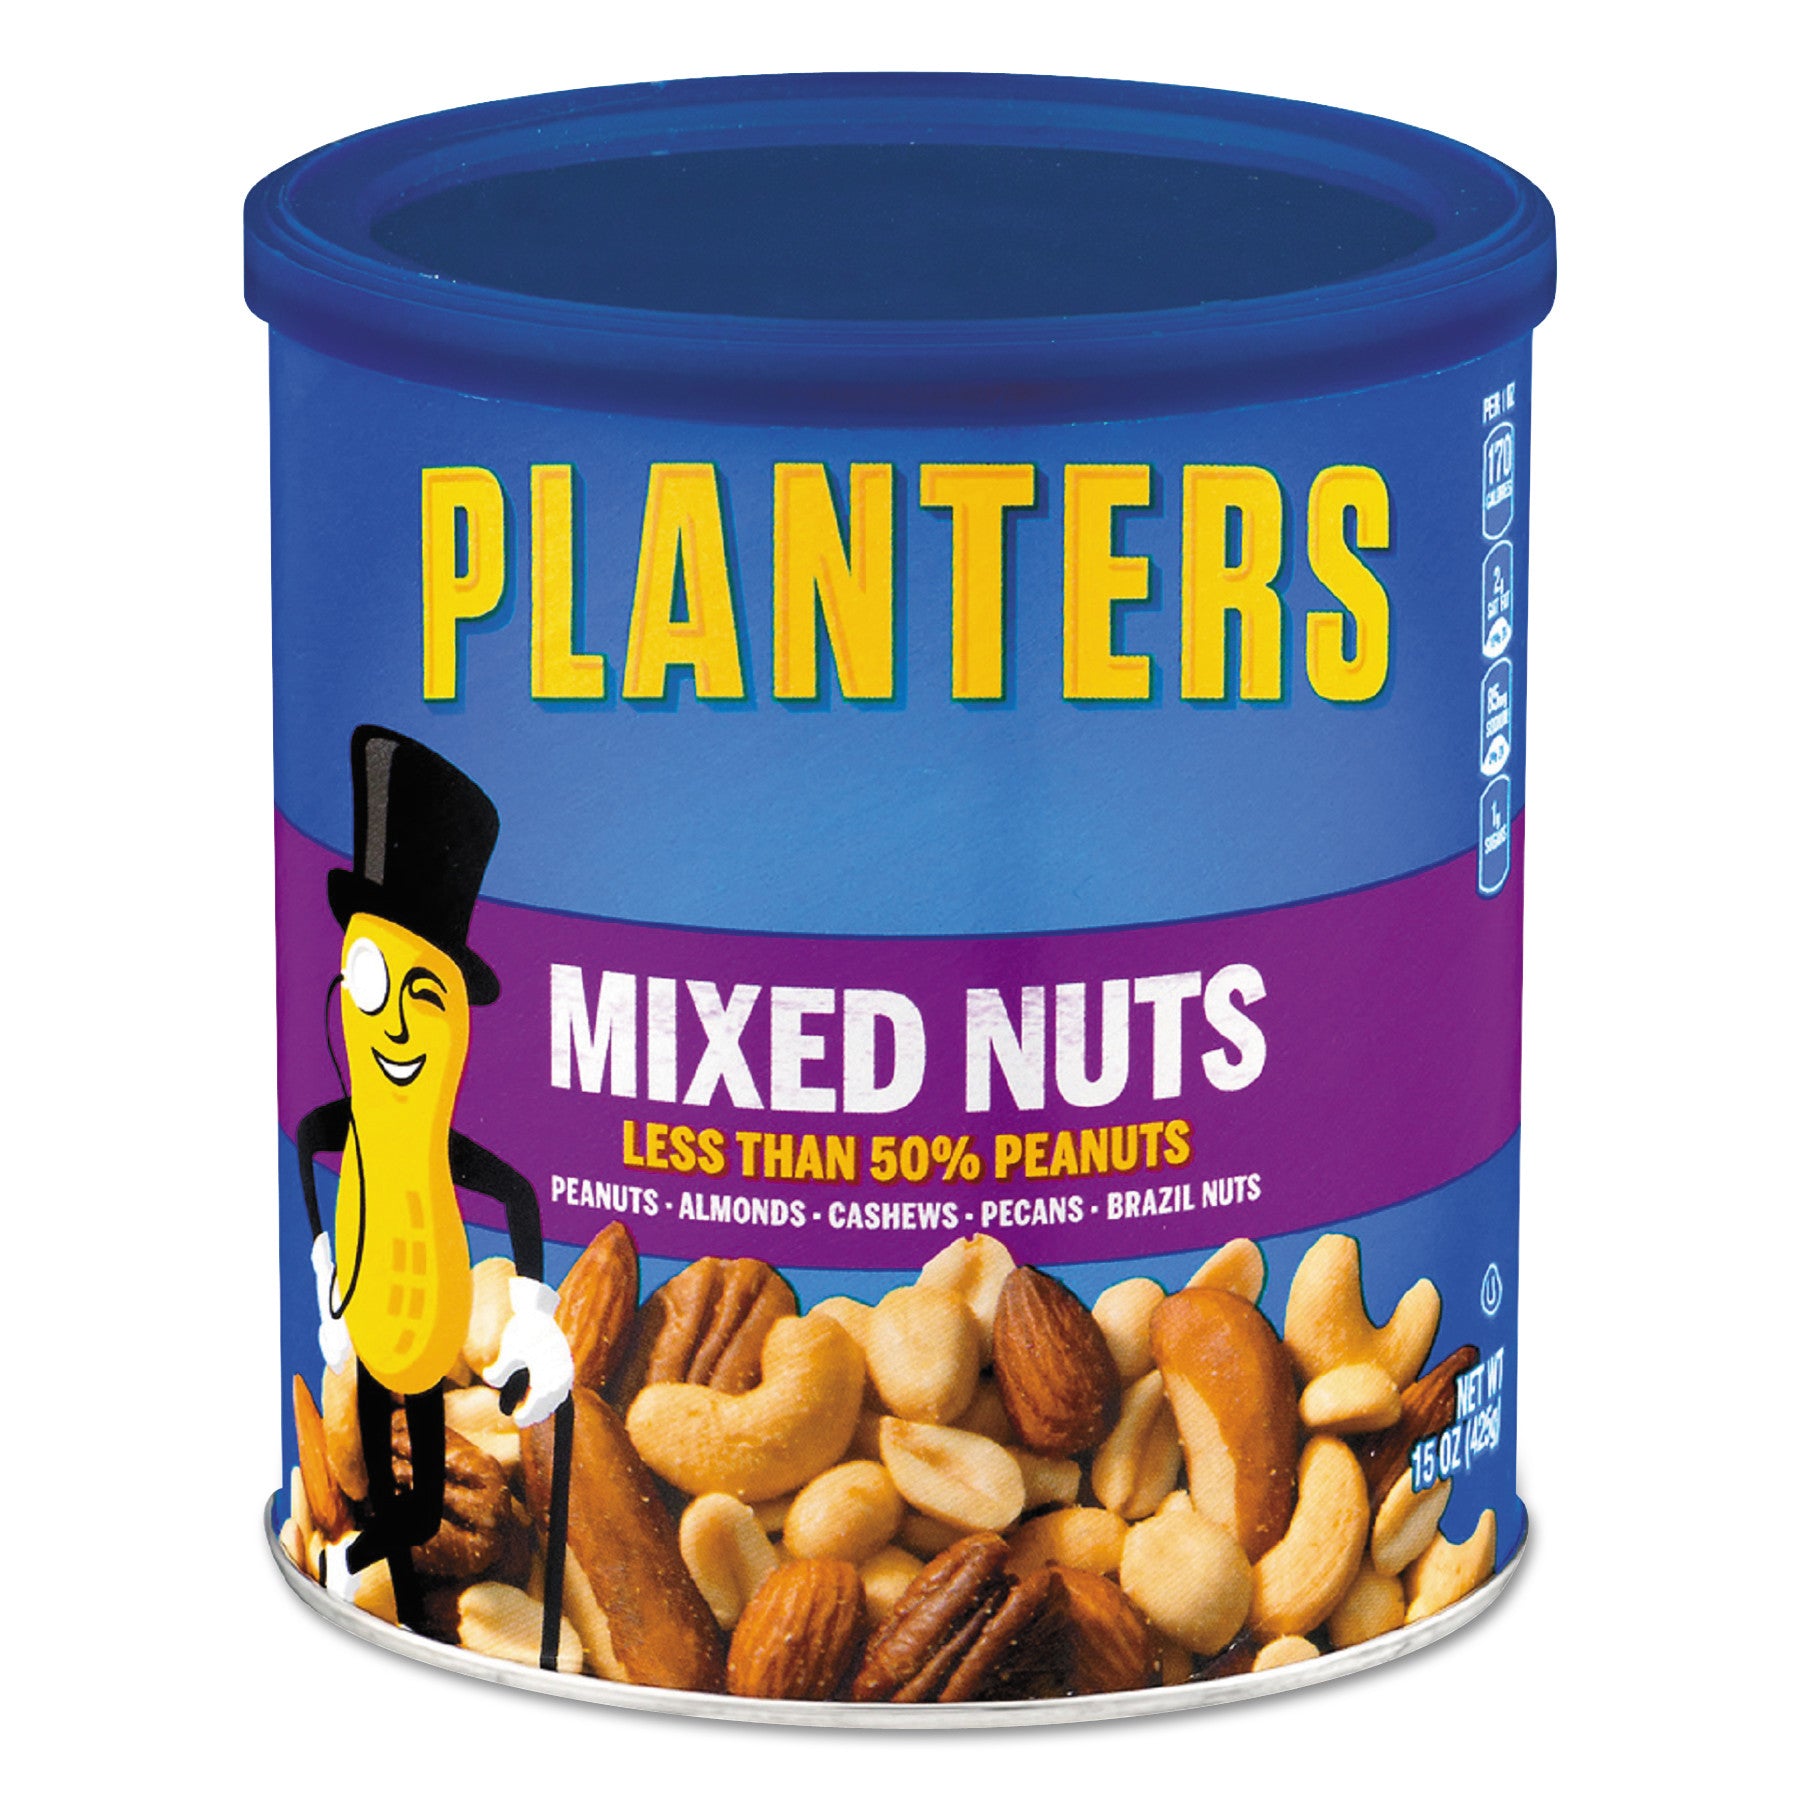 Mixed Nuts, 15 oz Can - 2